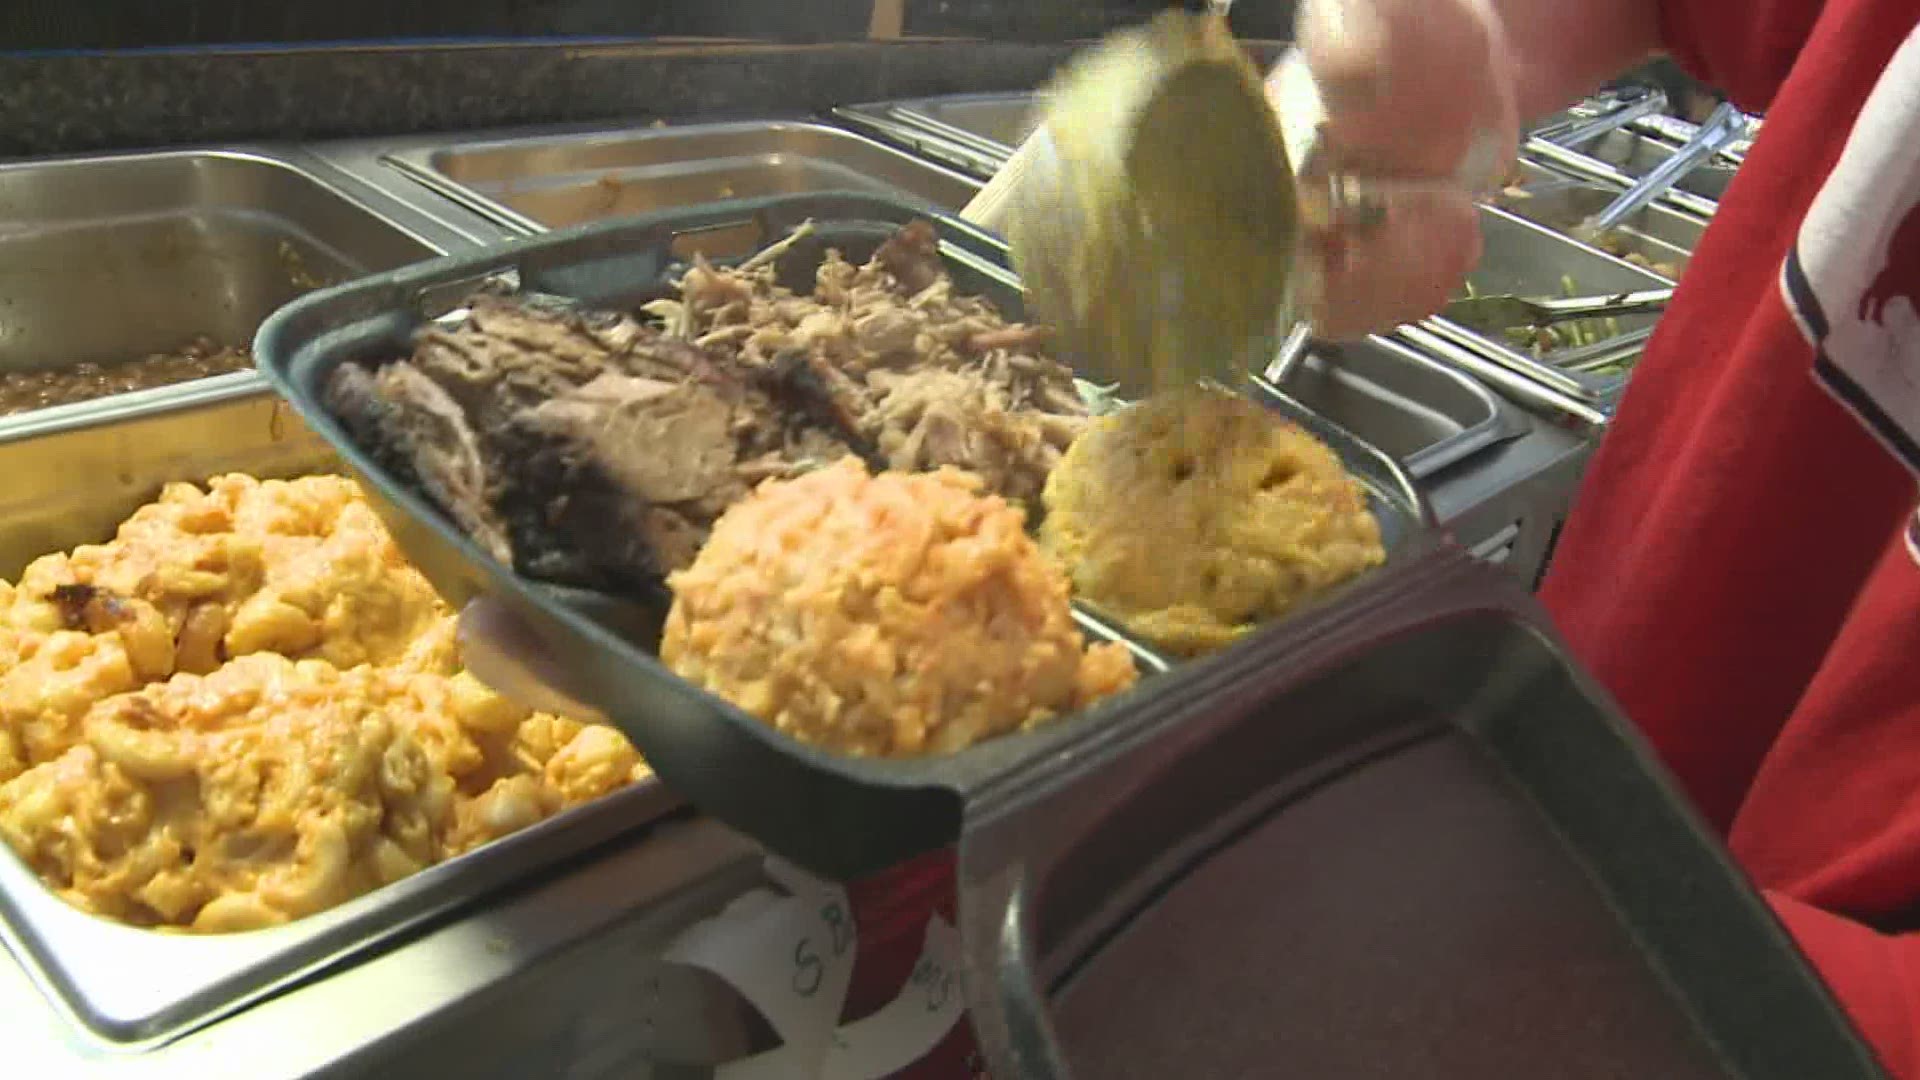 Don't want to cook this Christmas? No worries, the Pit Shop in Grand Rapids has a mind-blowing BBQ menu and they'll be serving up dinner over the holidays.